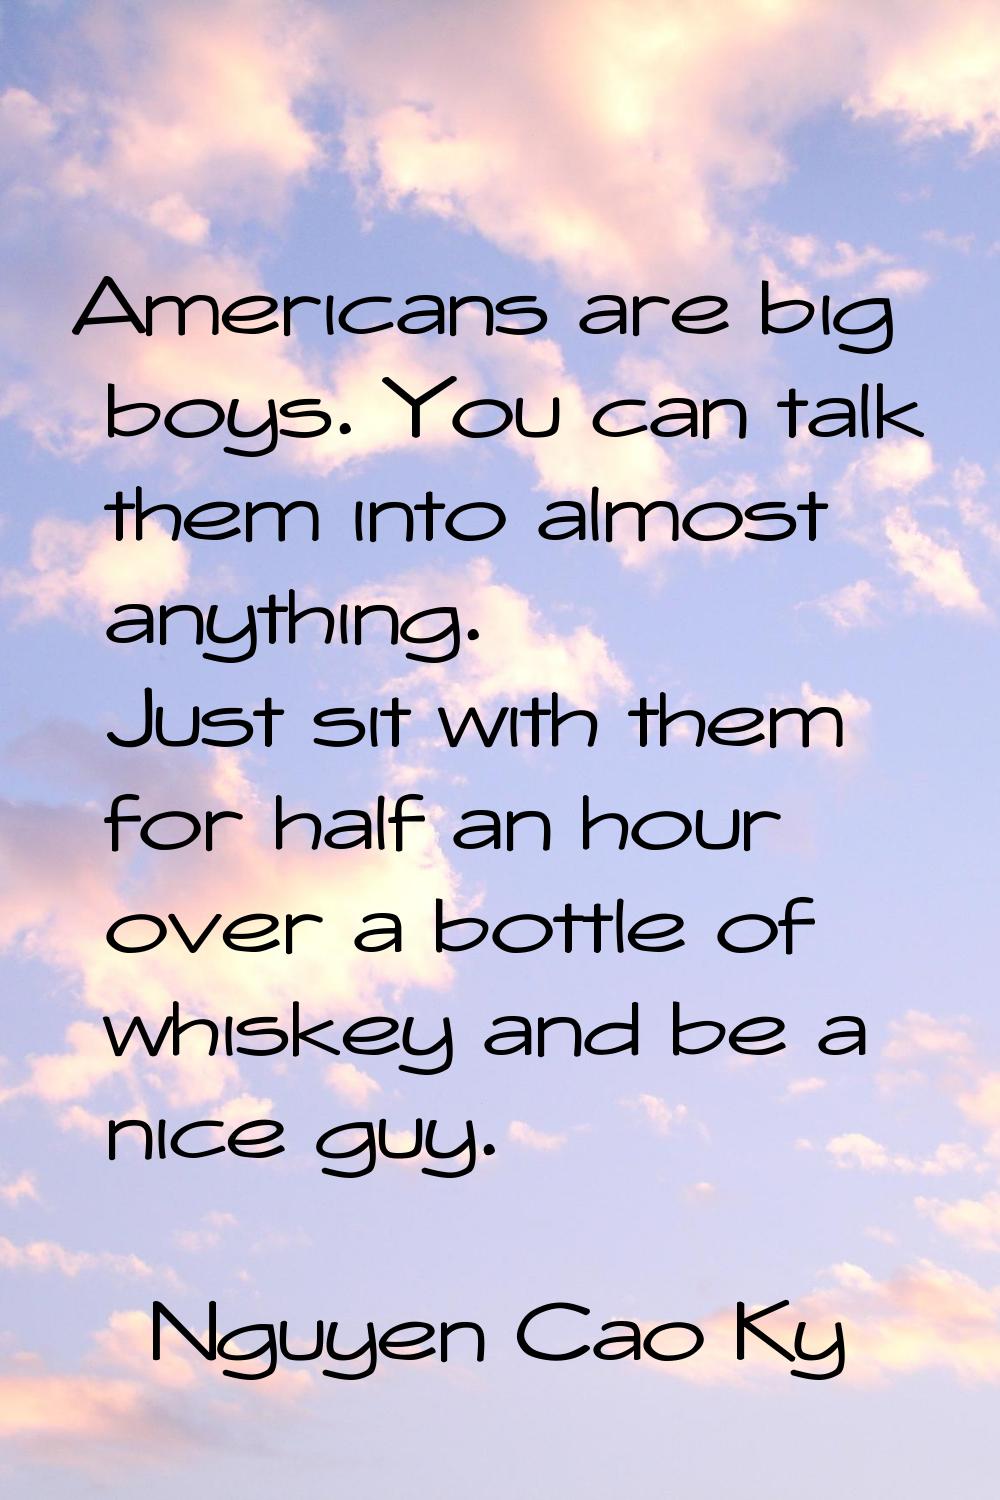 Americans are big boys. You can talk them into almost anything. Just sit with them for half an hour